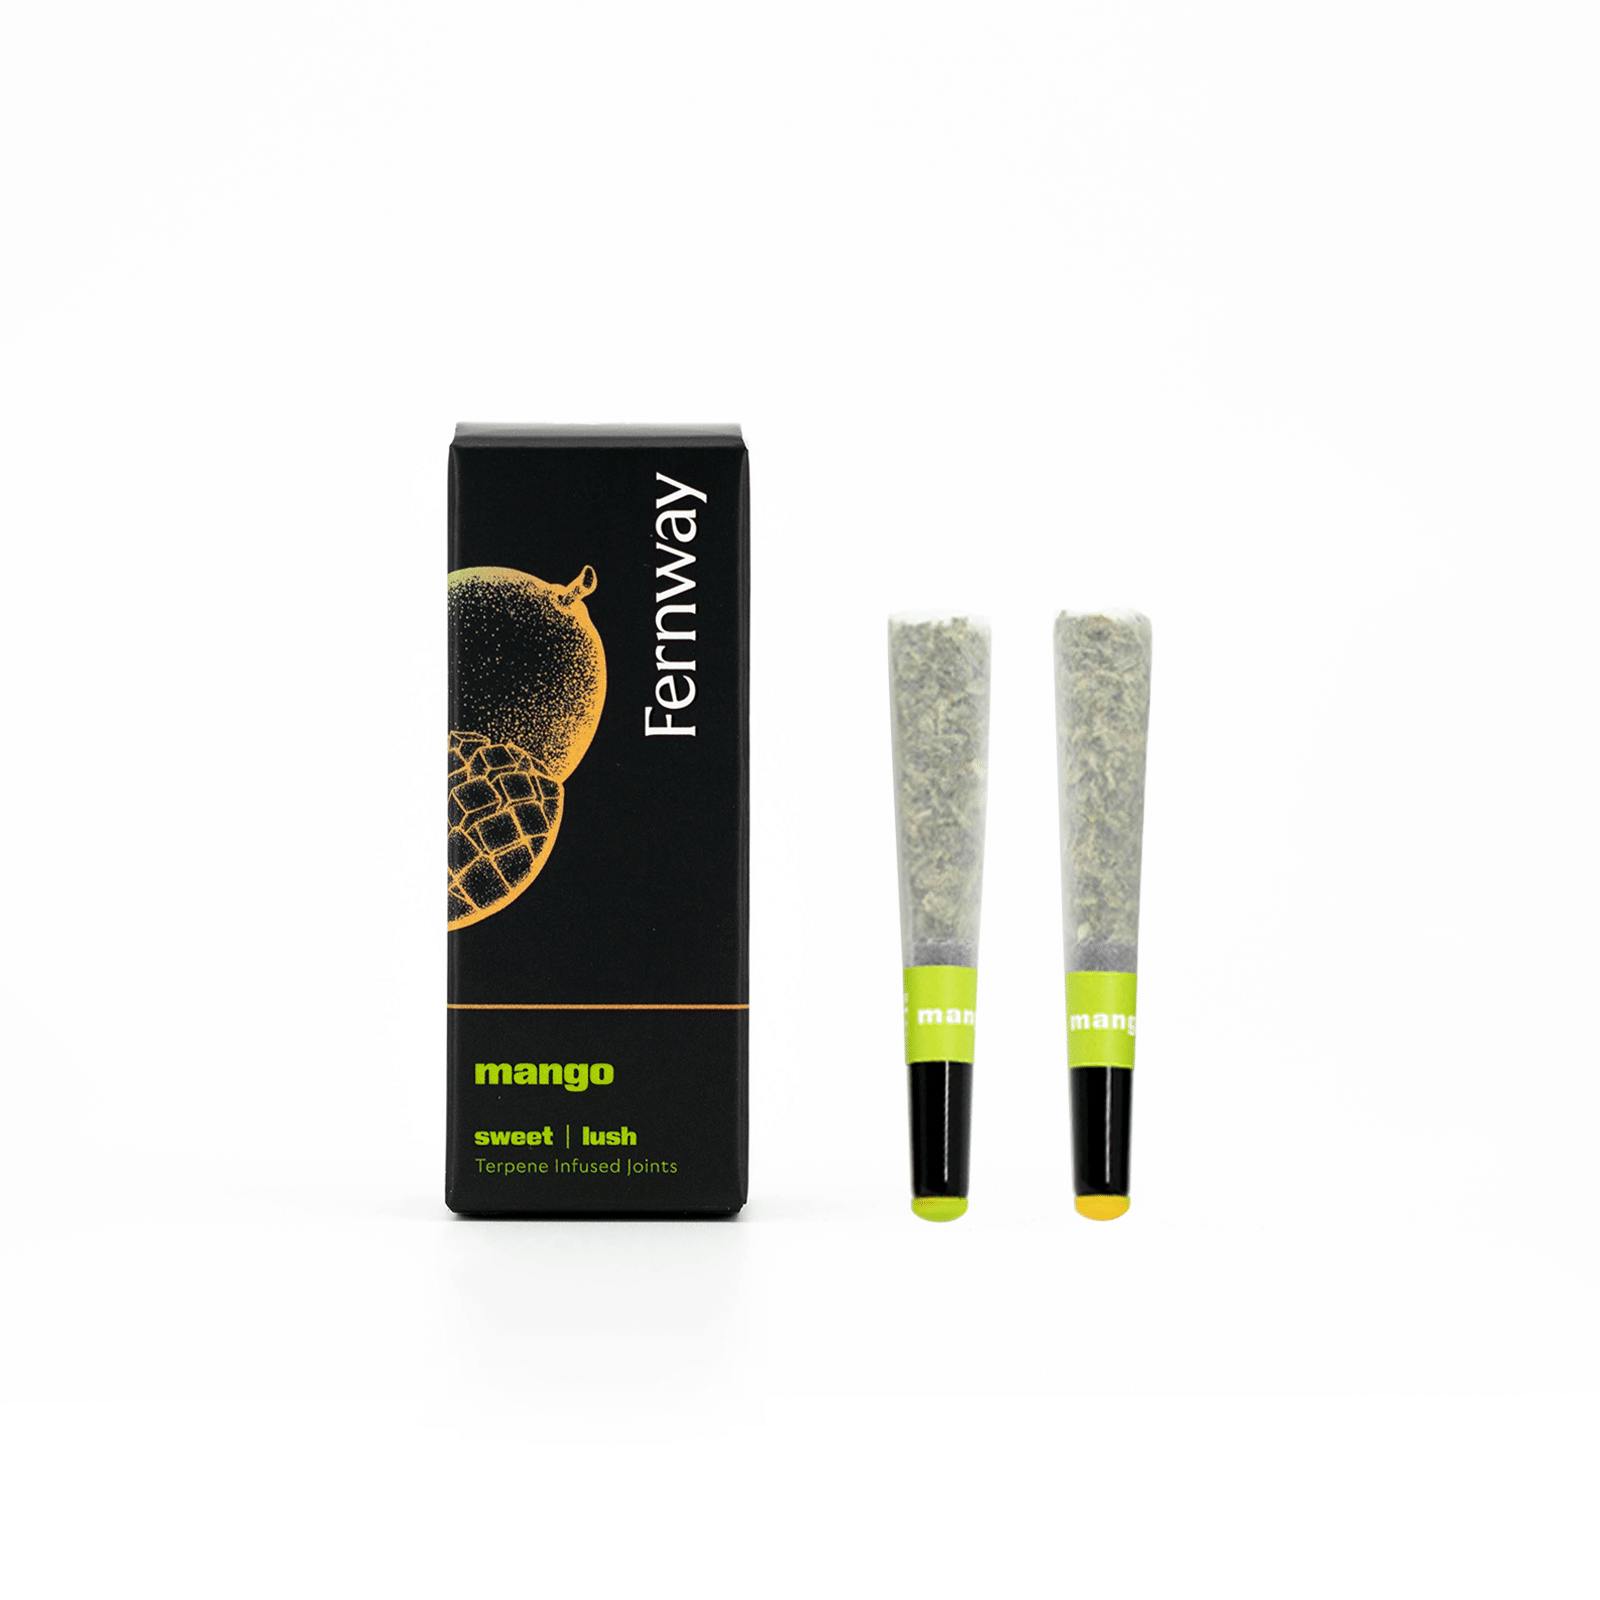 Mango Terpene Infused Joint 2-pack